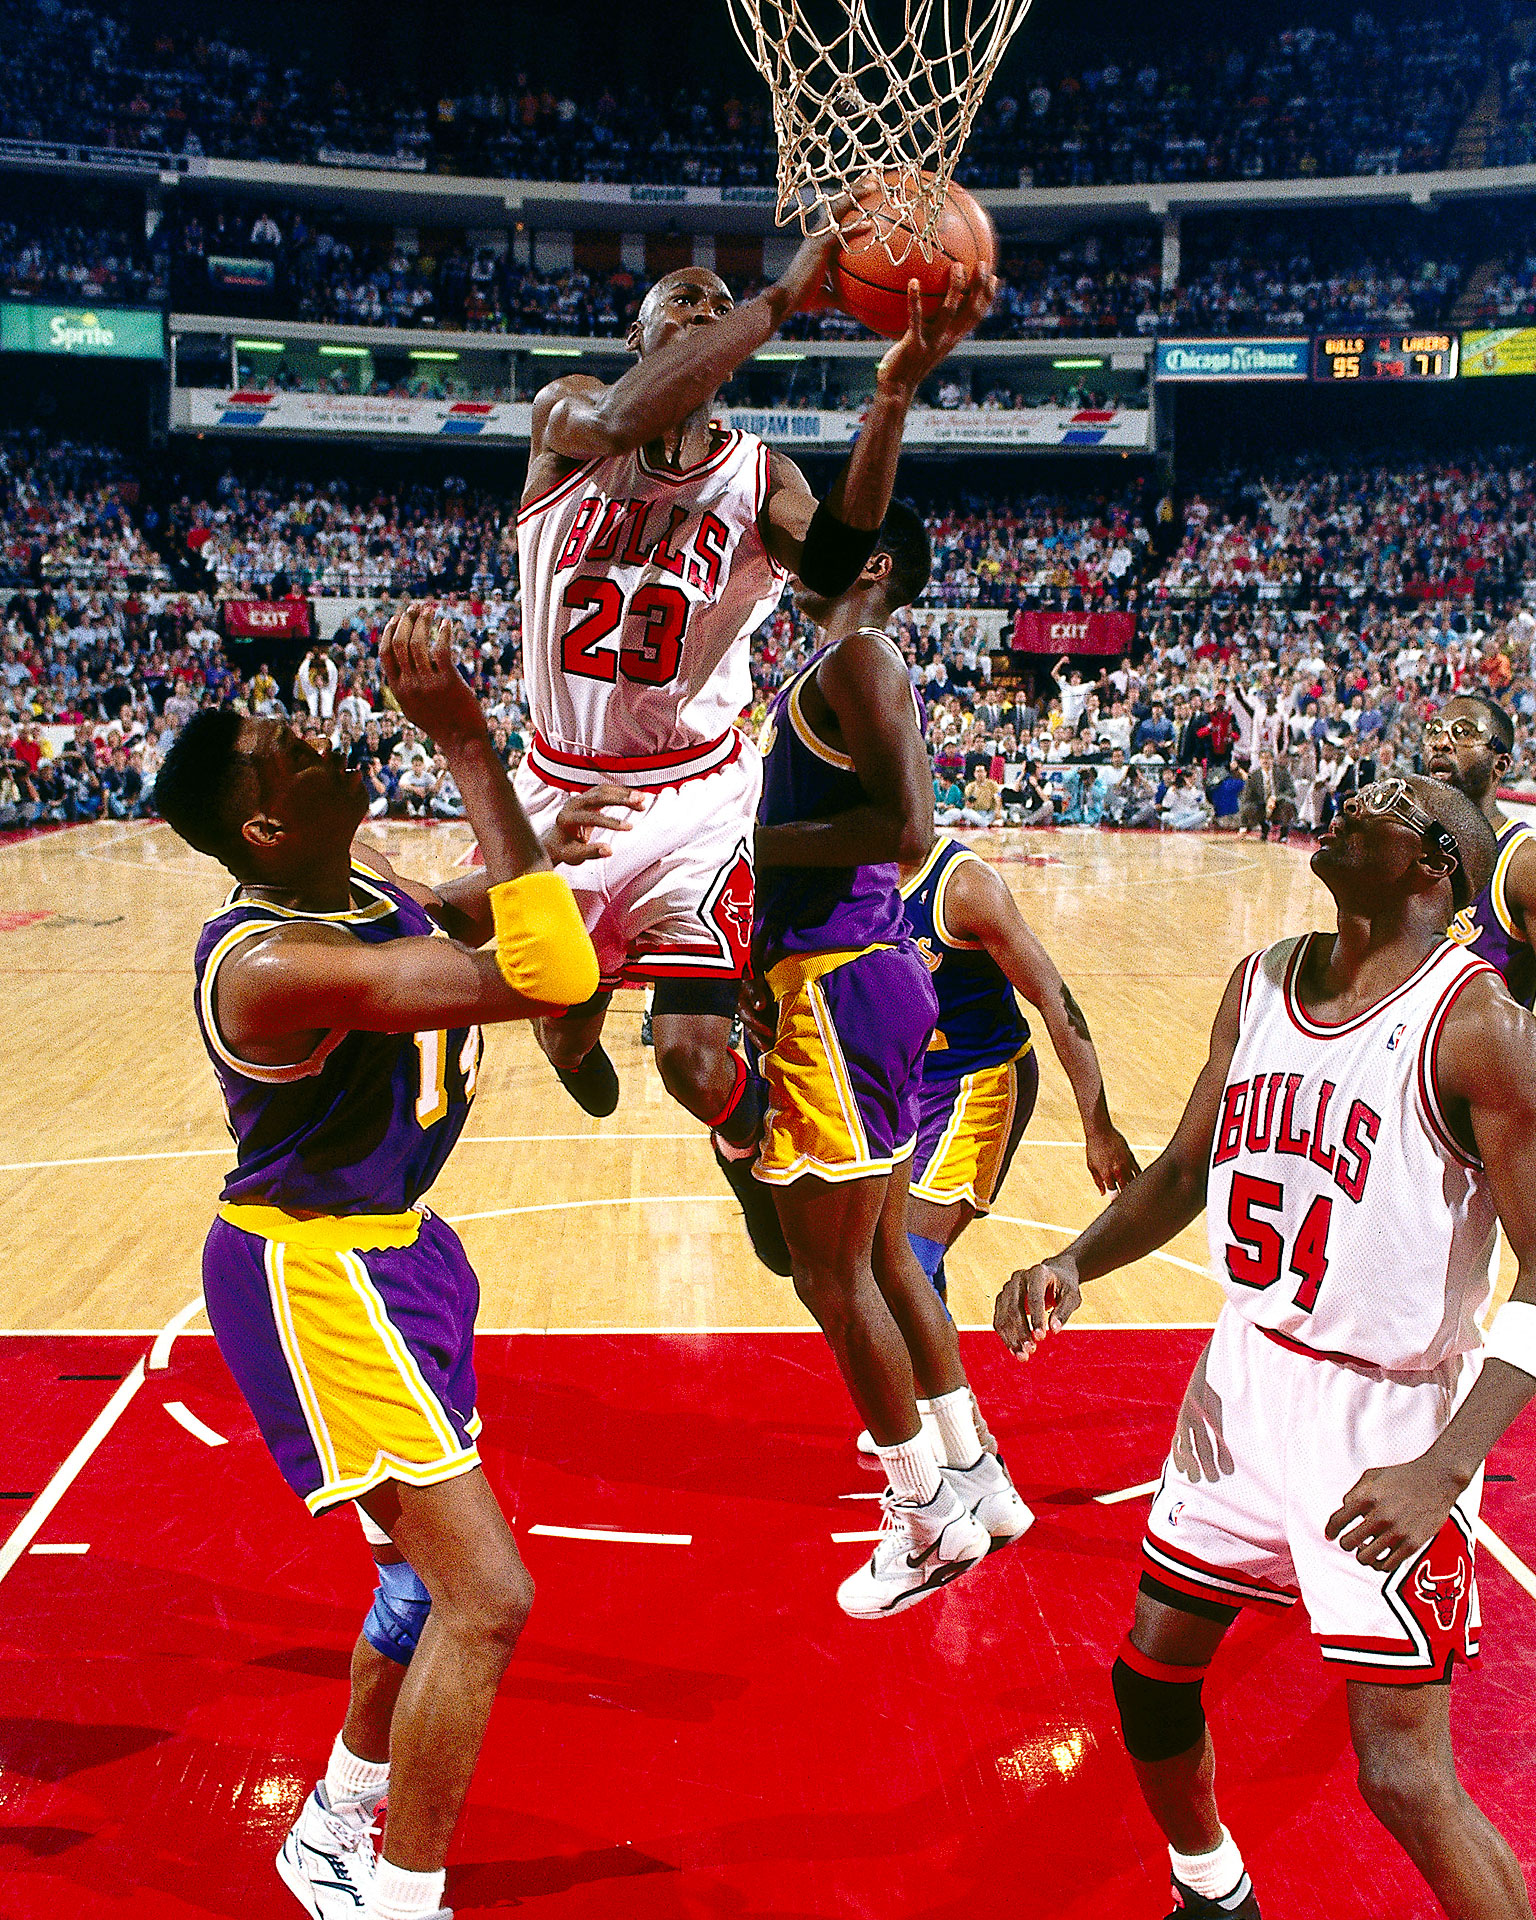 🎥: Michael Jordan scores 33 points on 83% shooting and dishes out